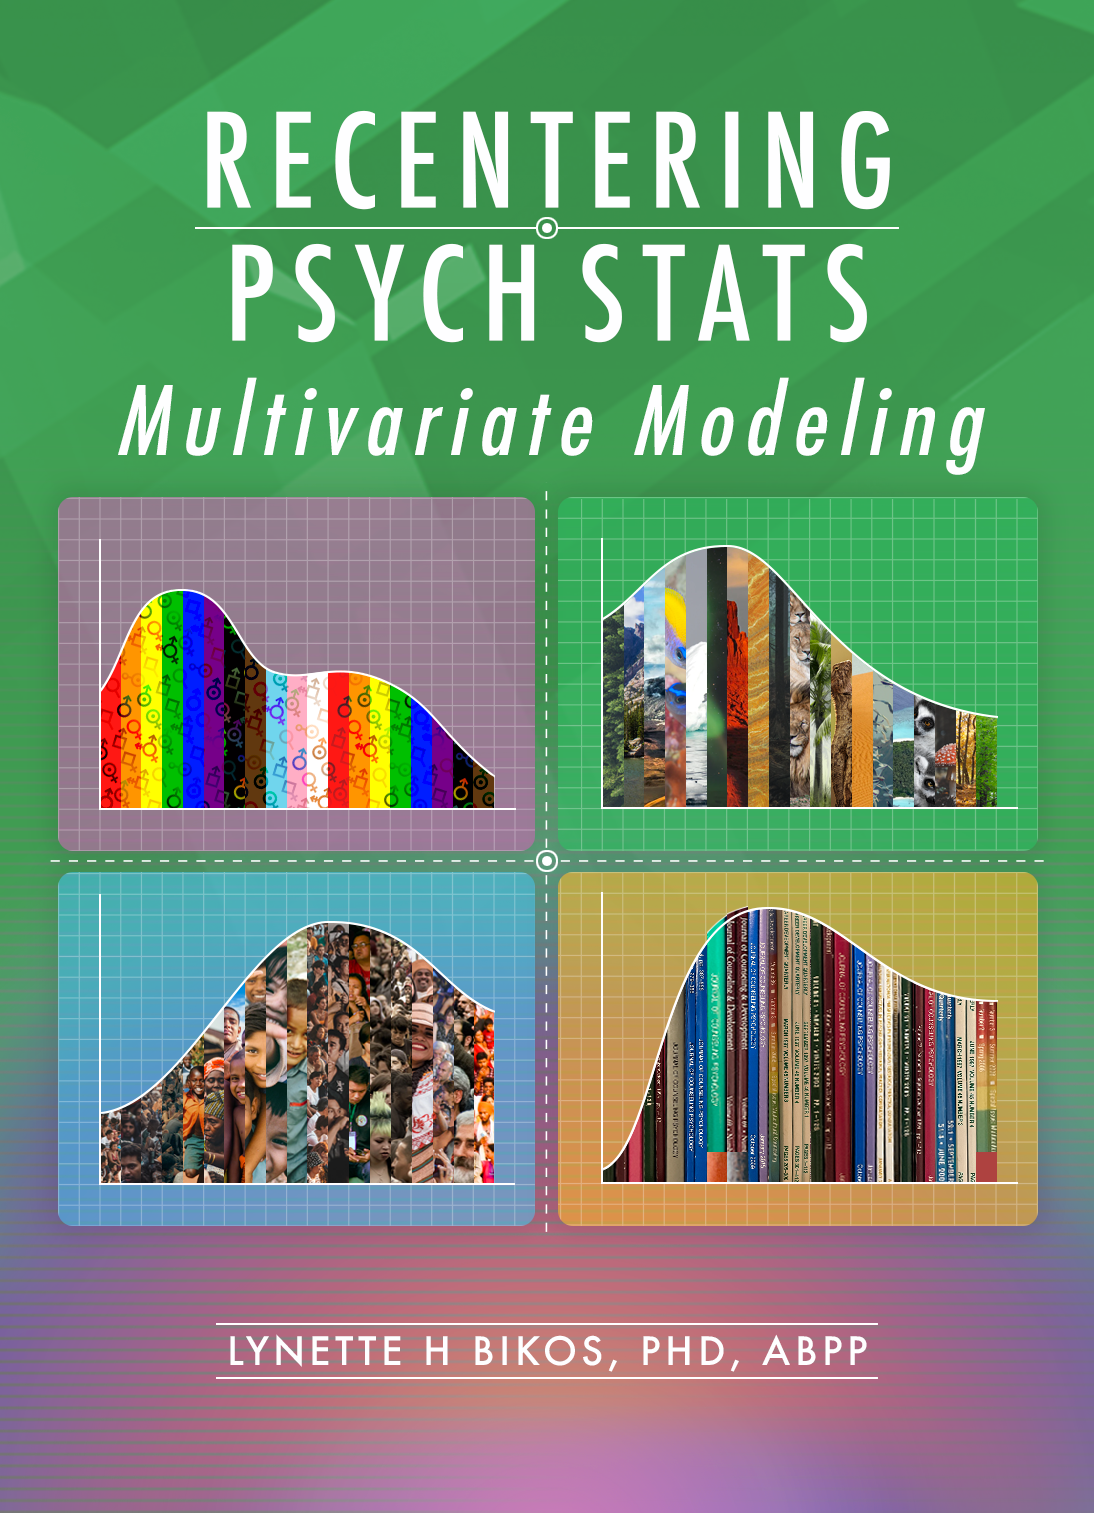 An image of the book cover. It includes four quadrants of non-normal distributions representing gender, race/ethnicty, sustainability/global concerns, and journal articles